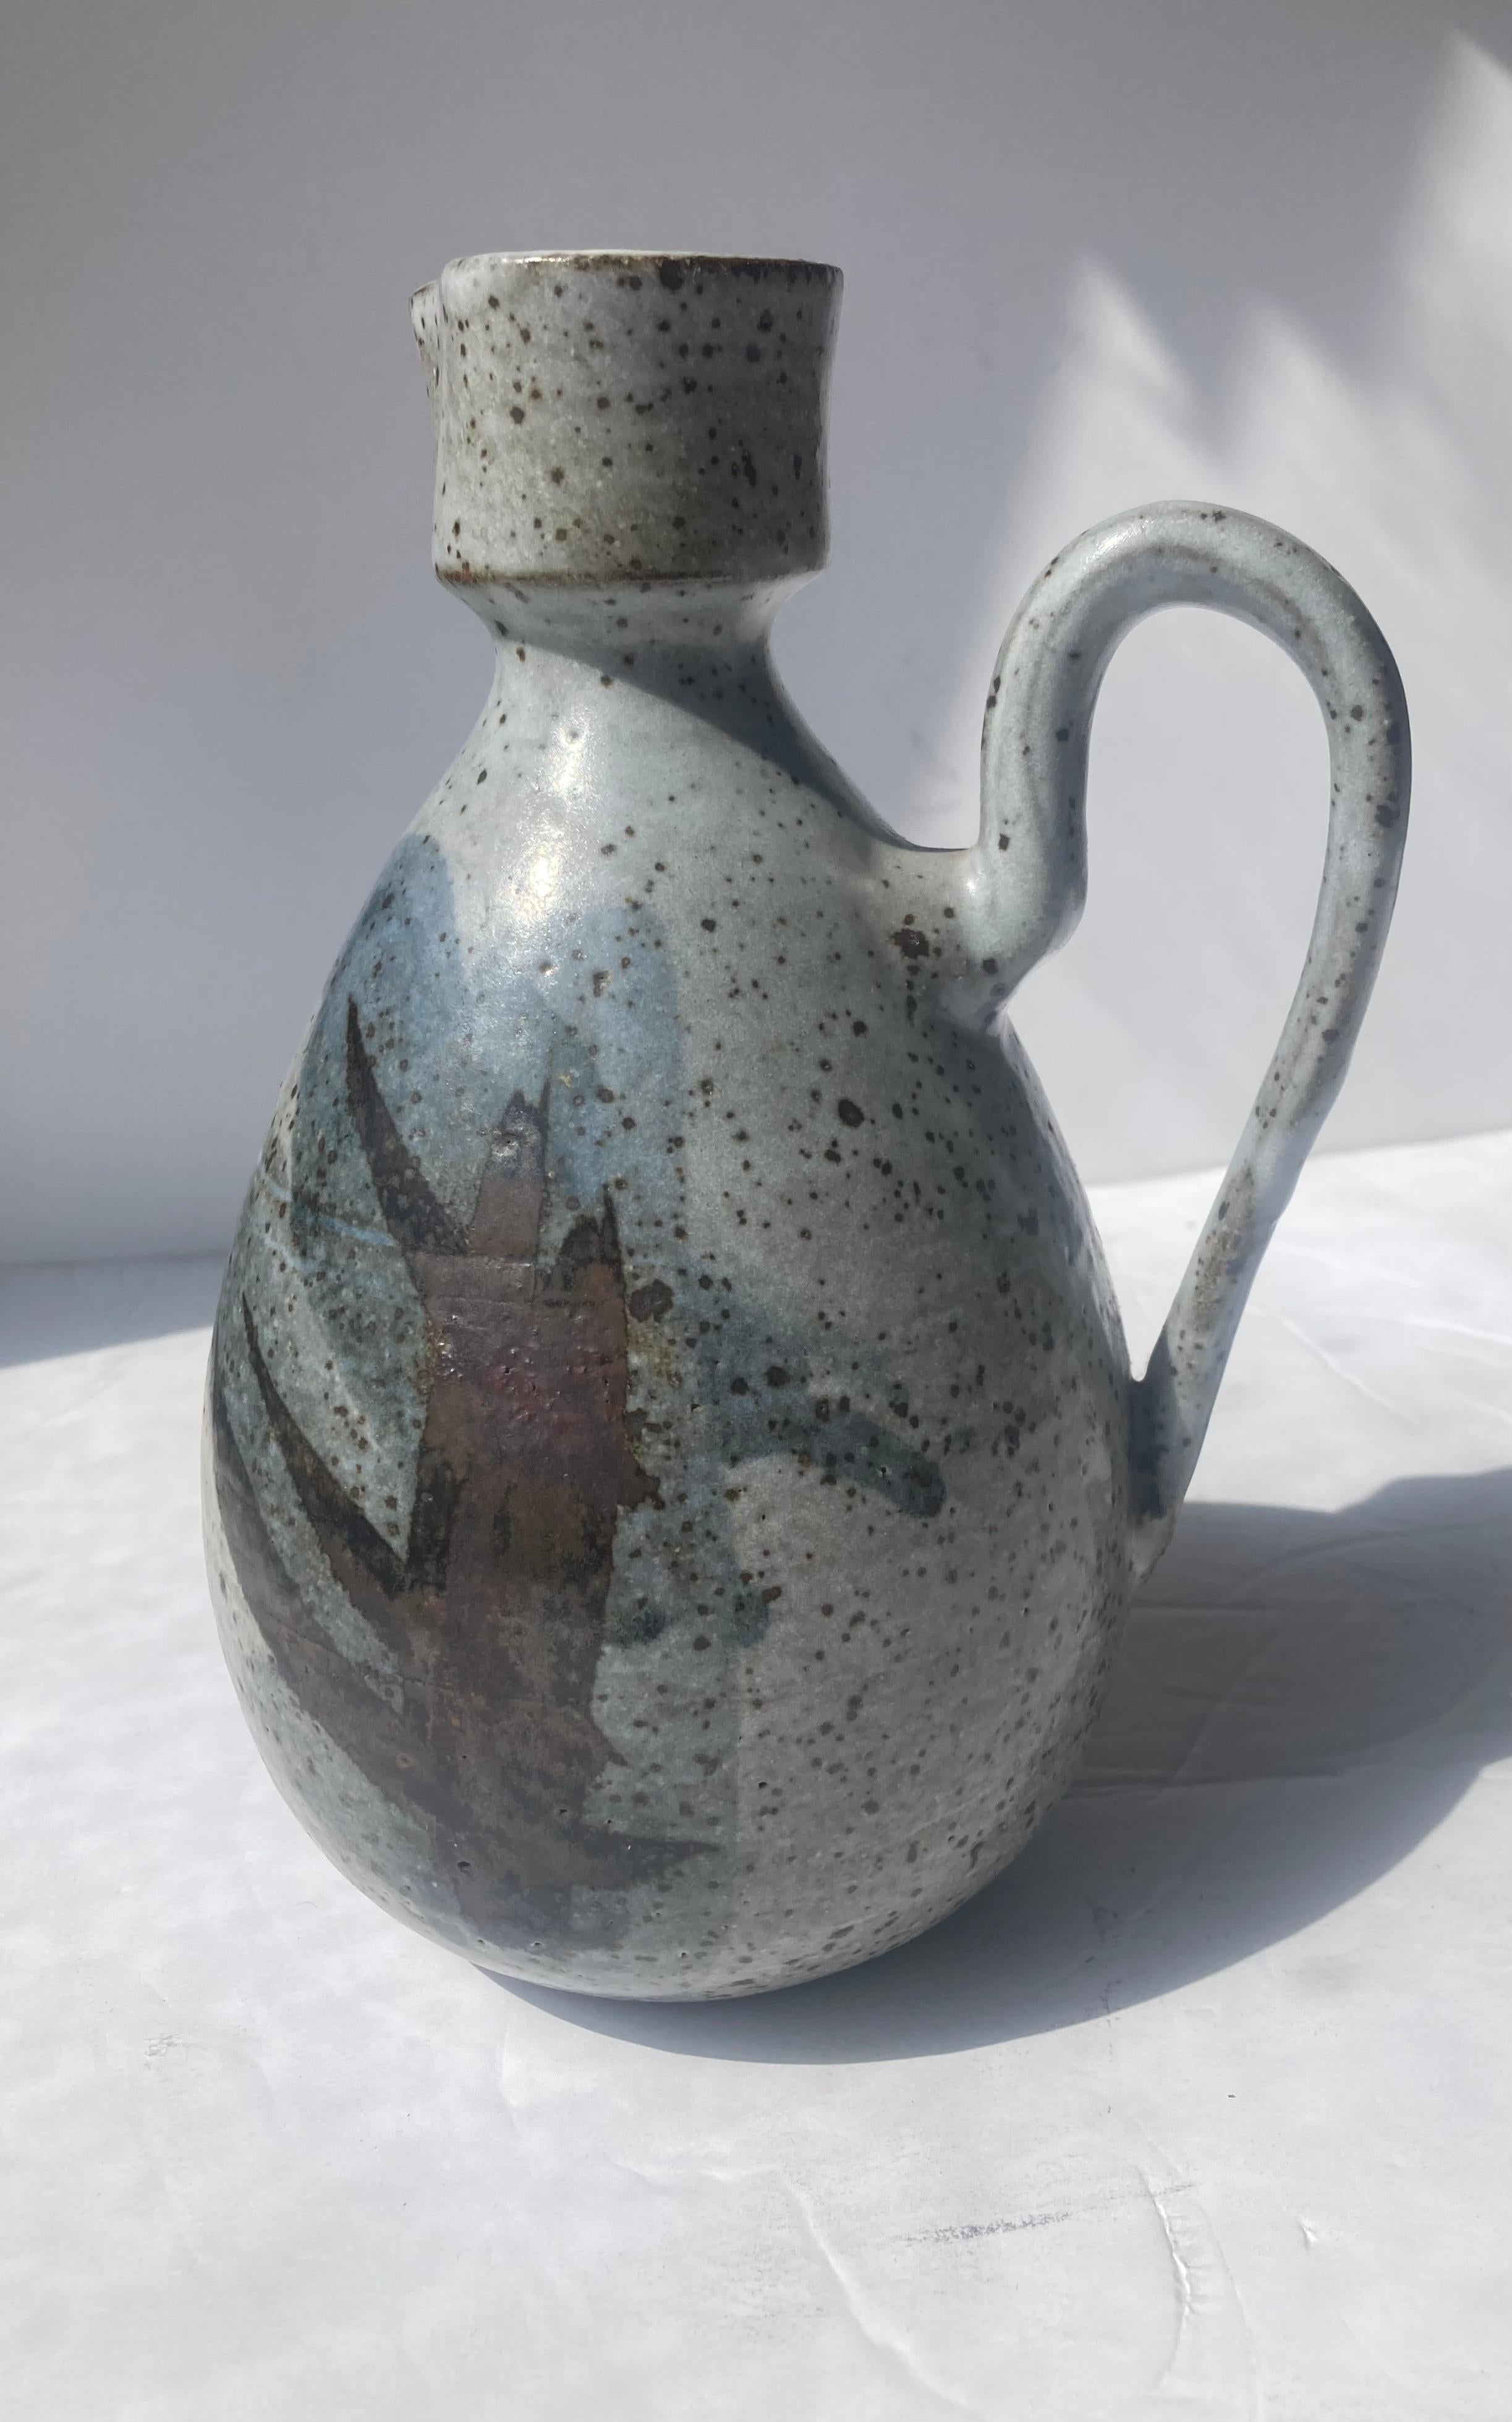 Beautiful pitcher with an abstract glaze. Edwards studied with very important potters in his time like Peter Voulkos, Marguerite Wildenhain and Soji Hamada.